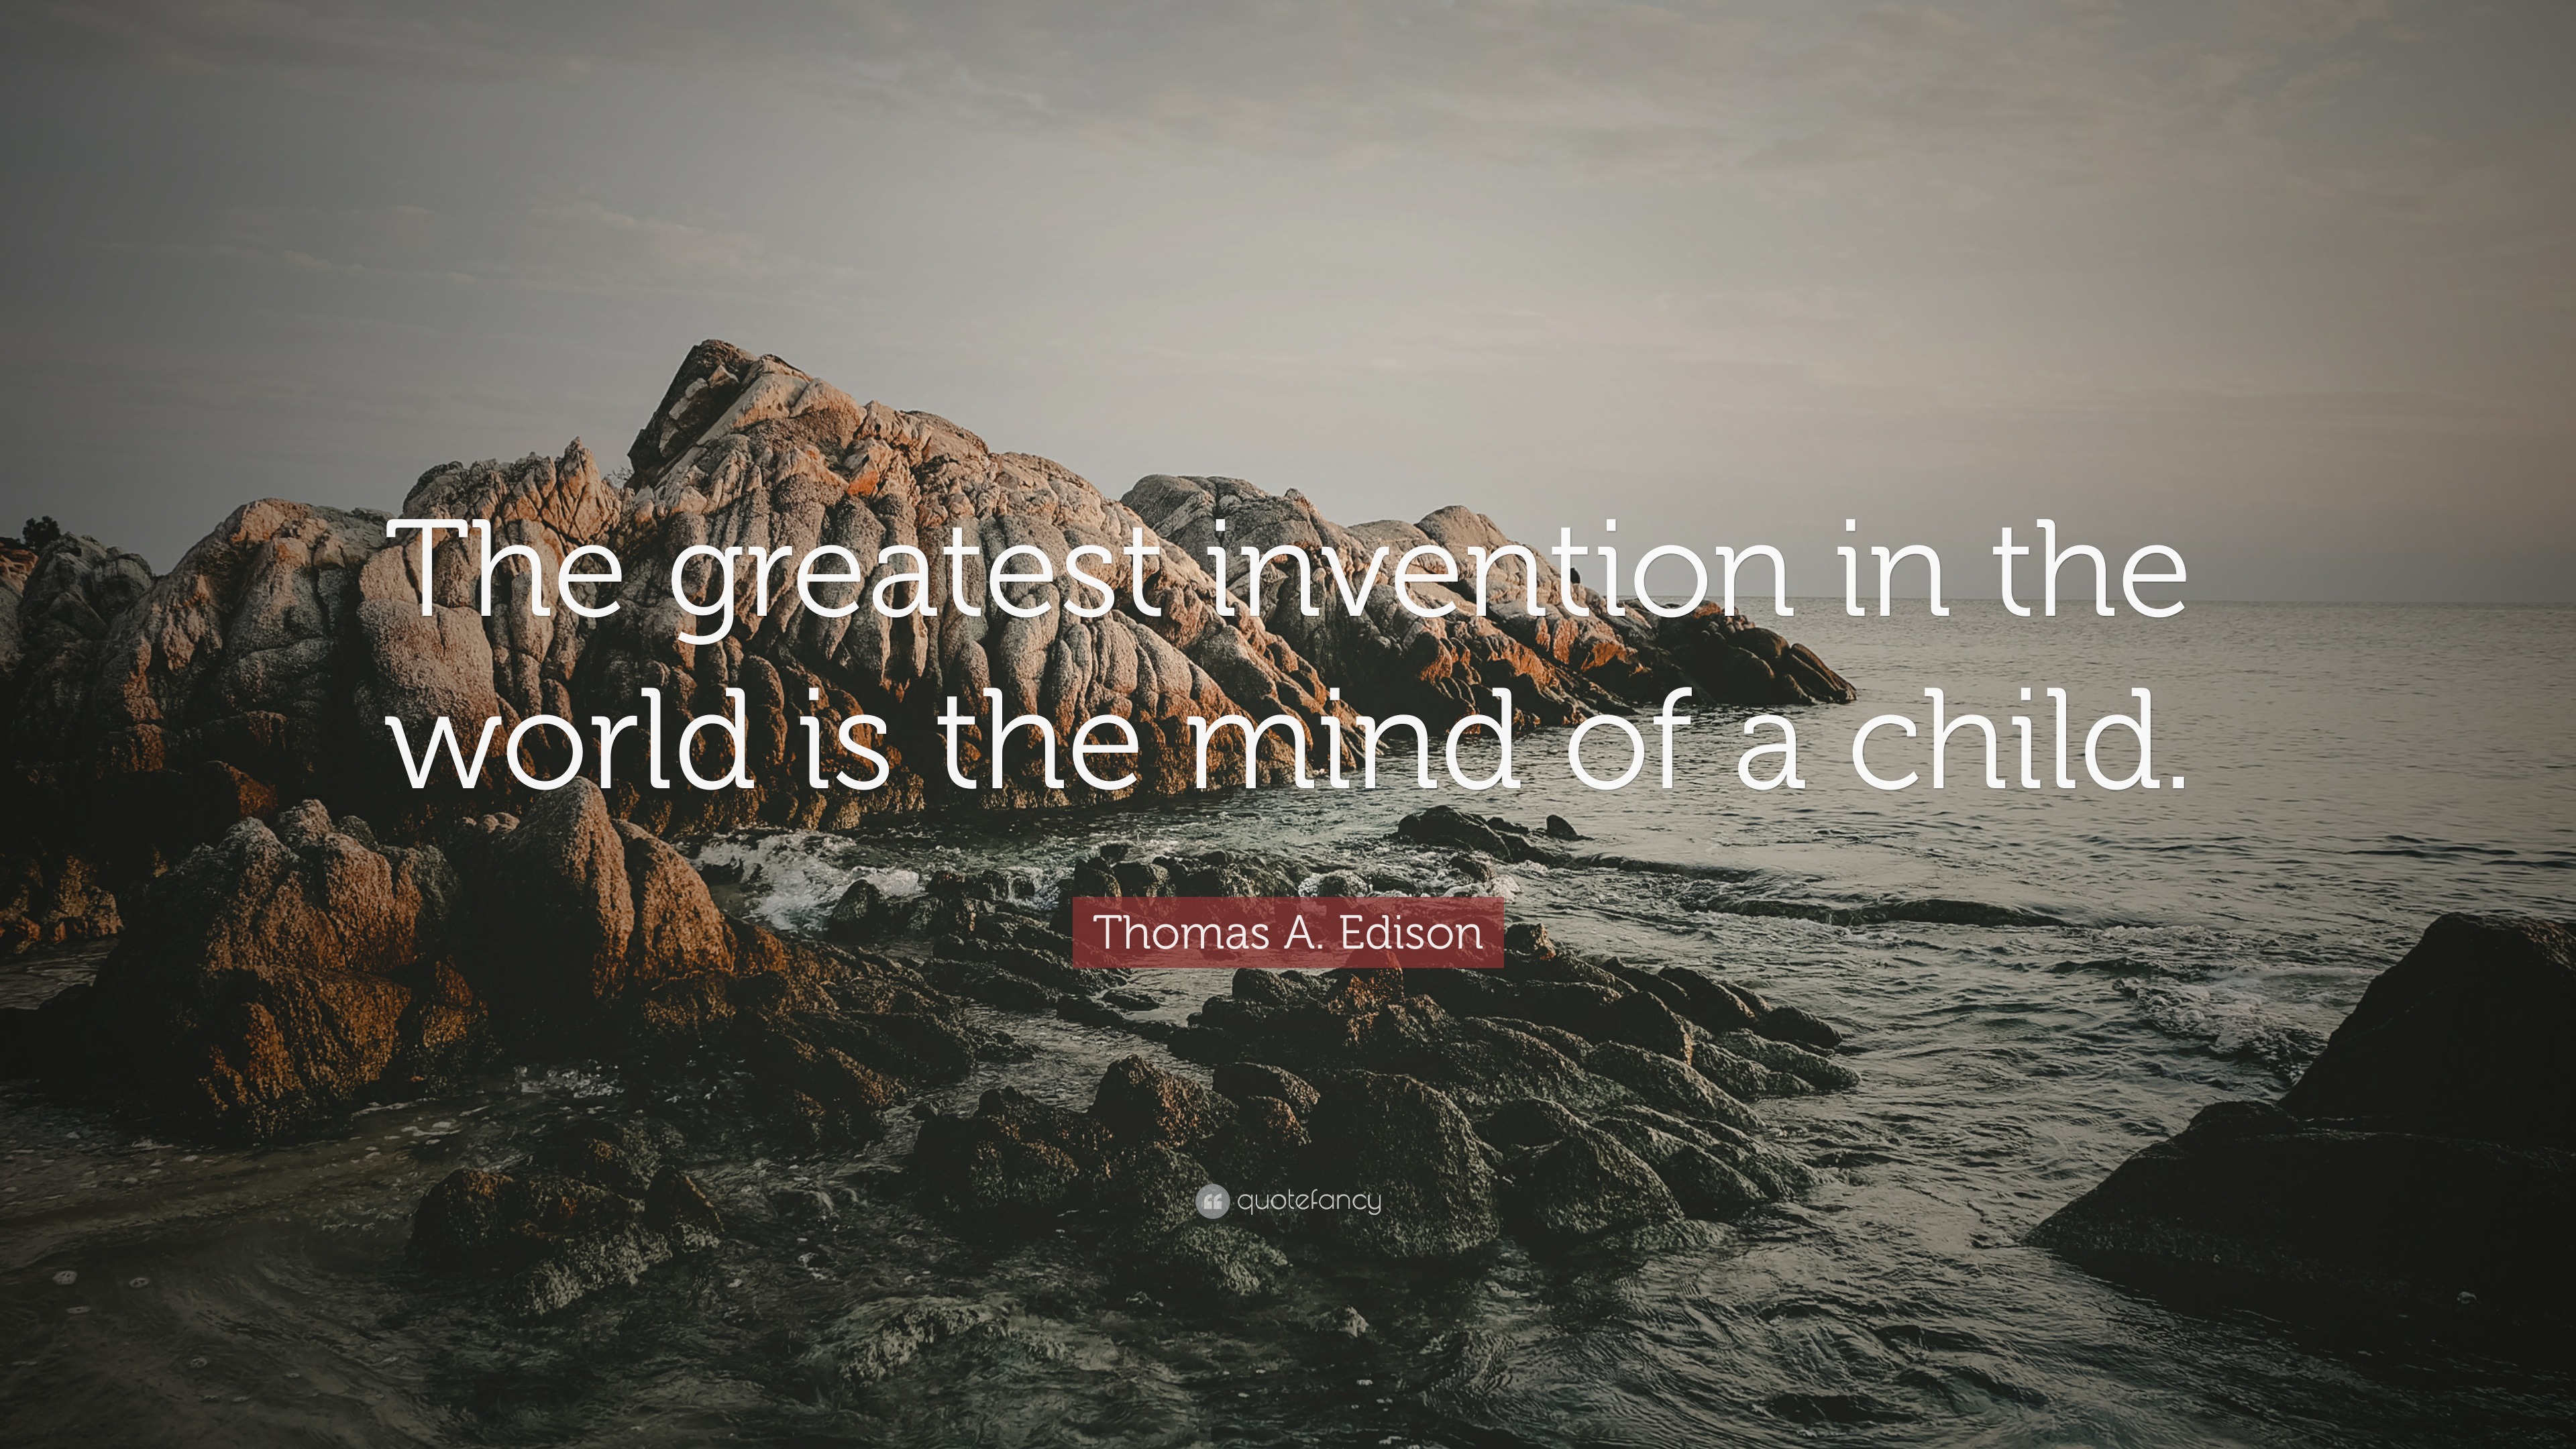 Thomas A. Edison Quote: “The greatest invention in the world is the mind of  a child.”